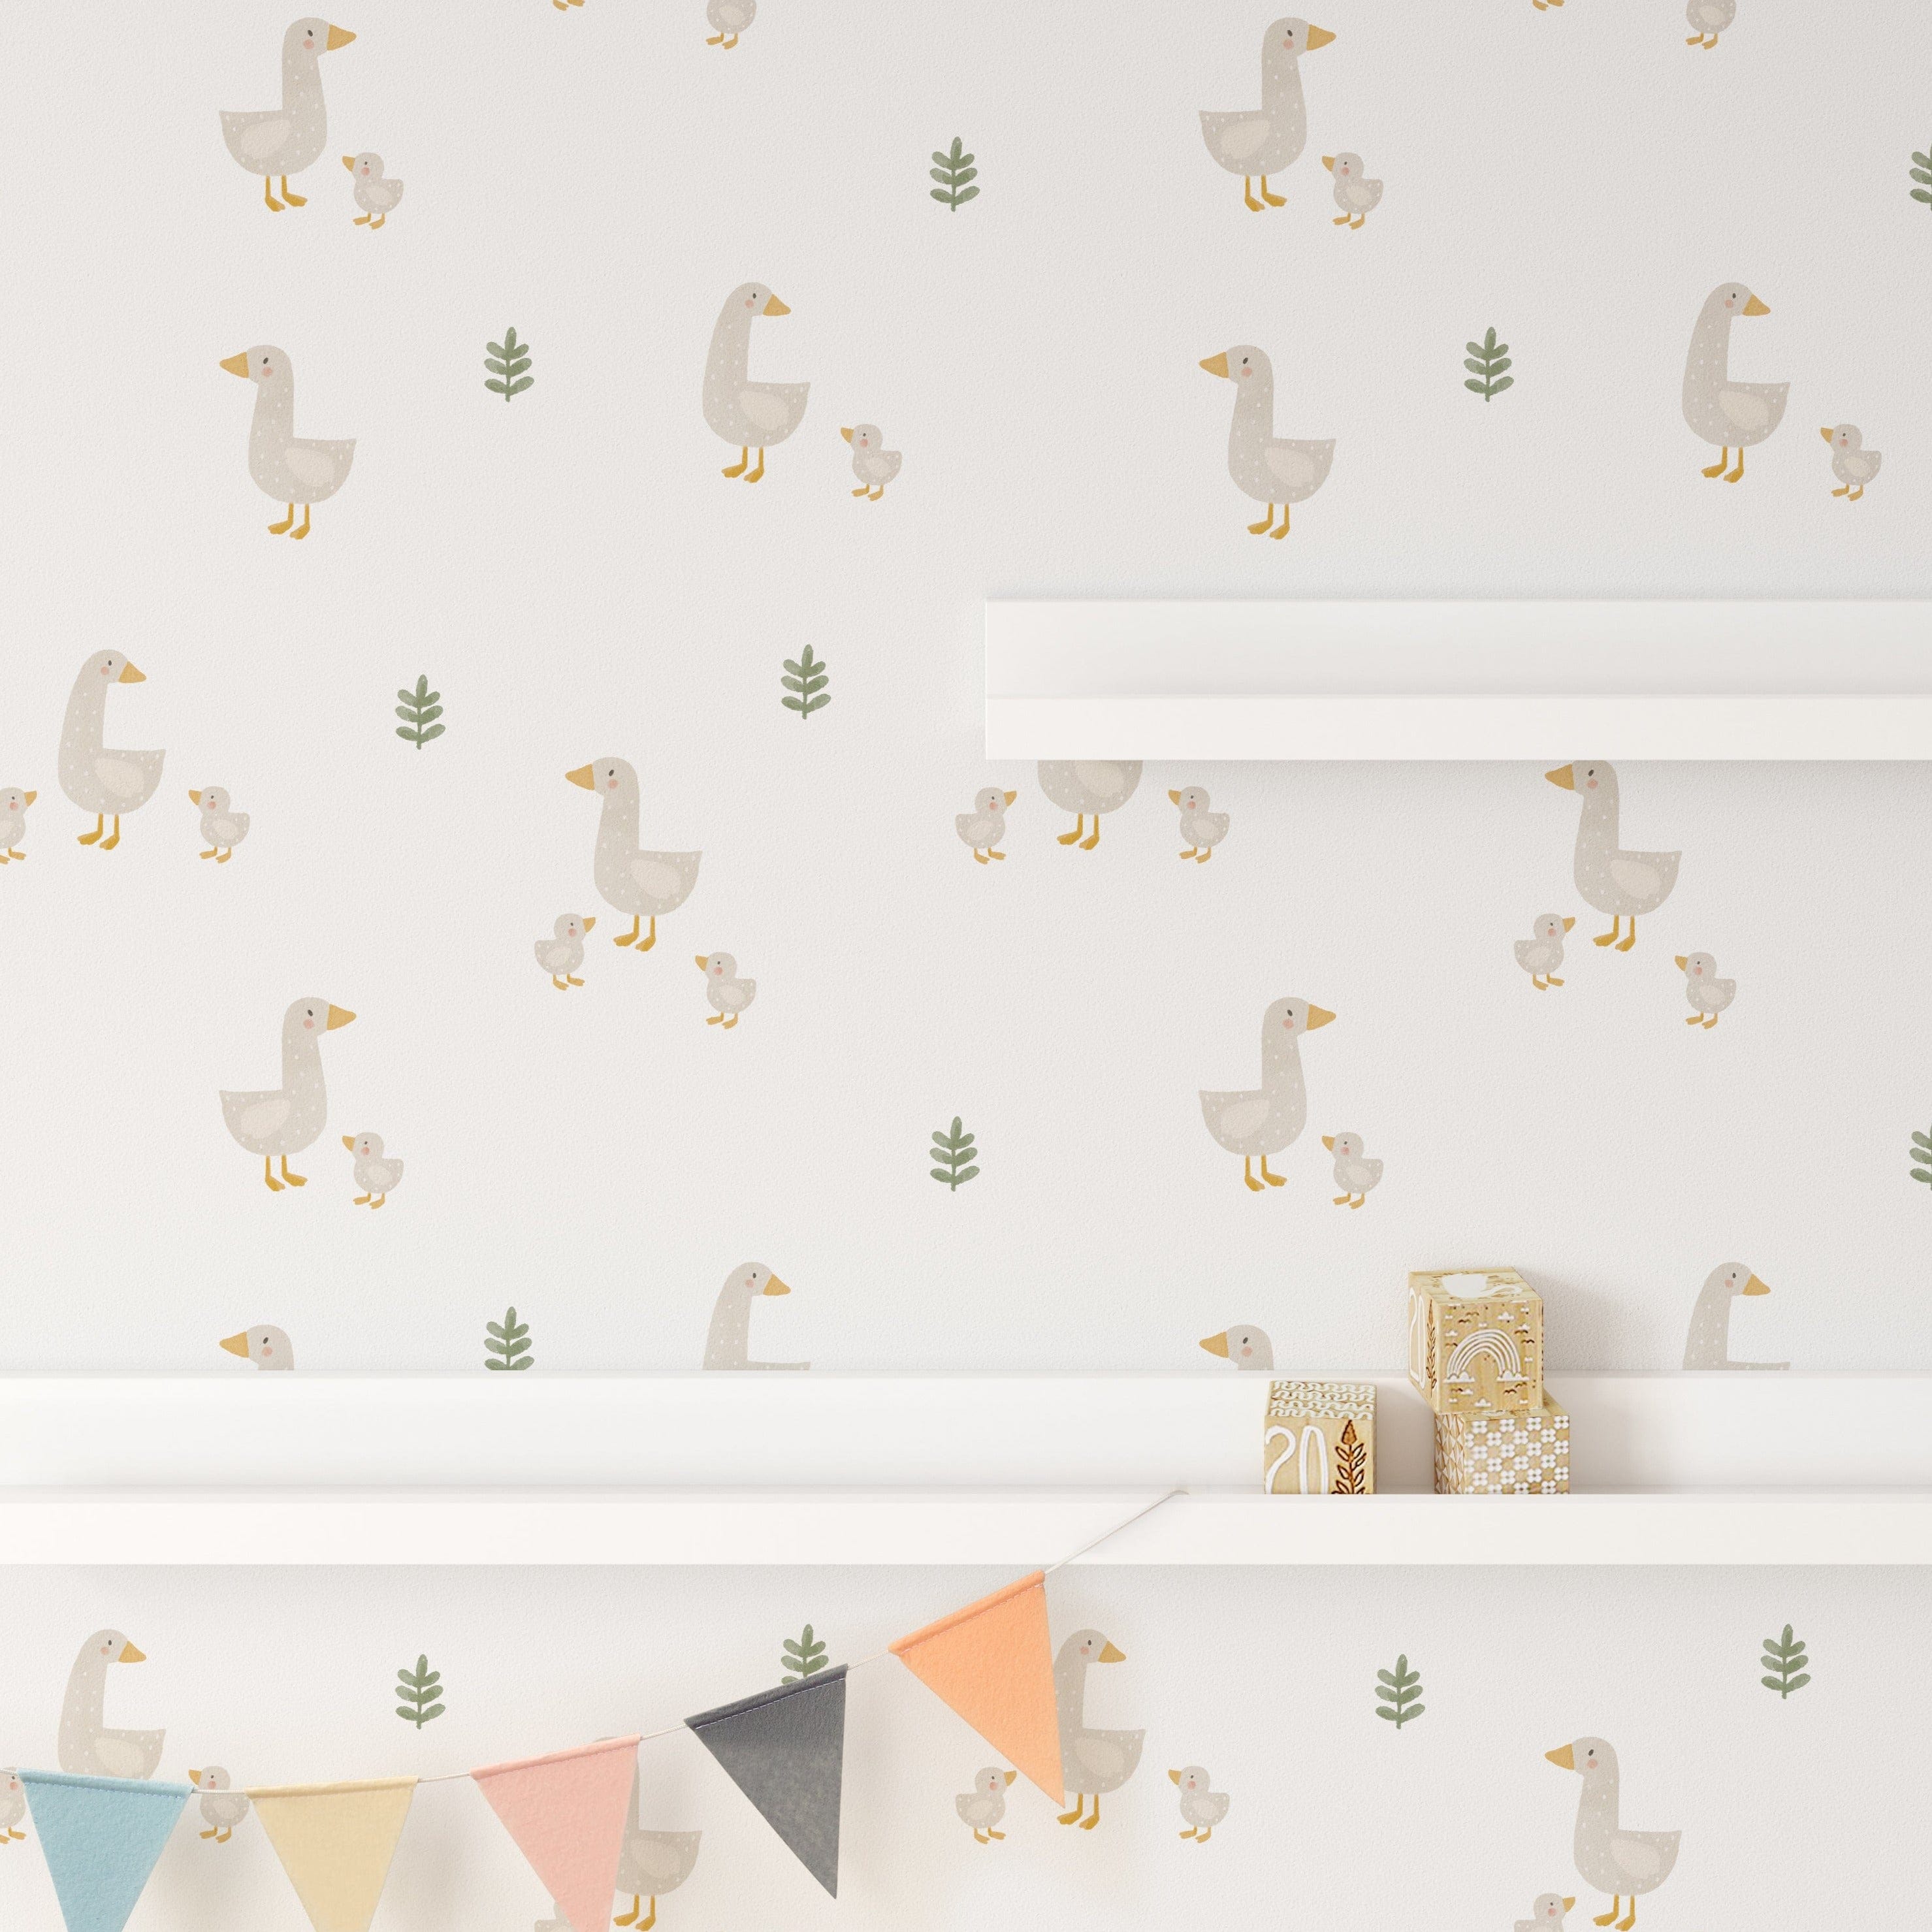 A section of a nursery wall covered in the Cute Farm Friend Wallpaper with a pattern of ducks and green plants. The wallpaper is accentuated by a colorful bunting, a white shelf with children's toys and books, offering a playful yet serene backdrop for a child's room.